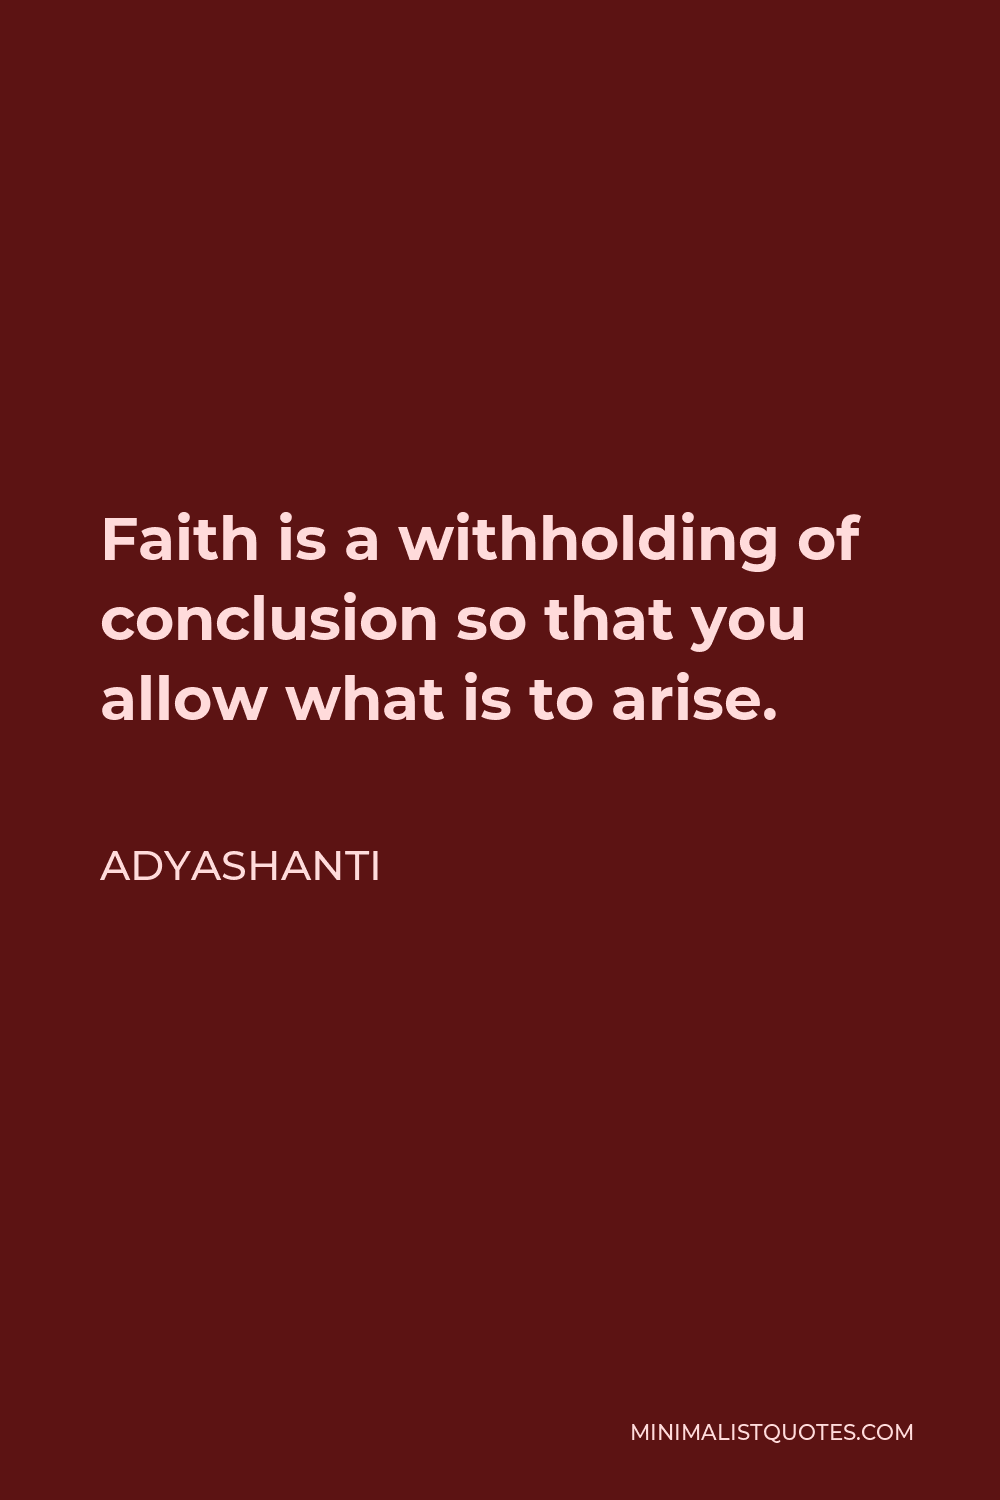 Adyashanti Quote - Faith is a withholding of conclusion so that you allow what is to arise.